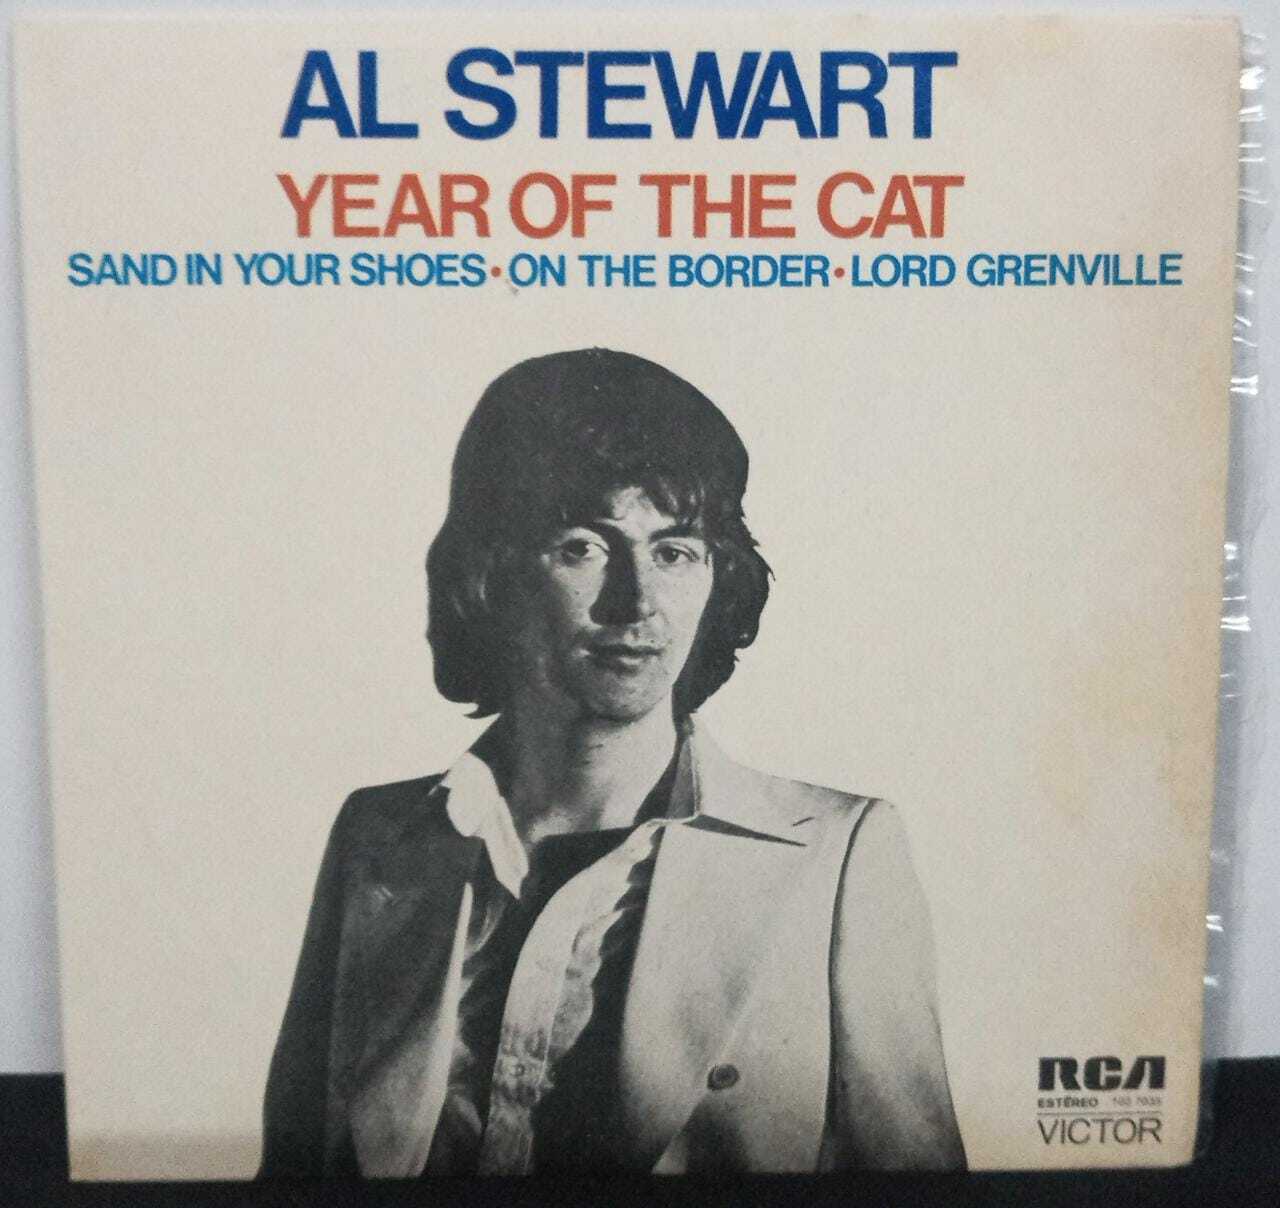 Vinil Compacto - Al Stewart - Year Of The Cat